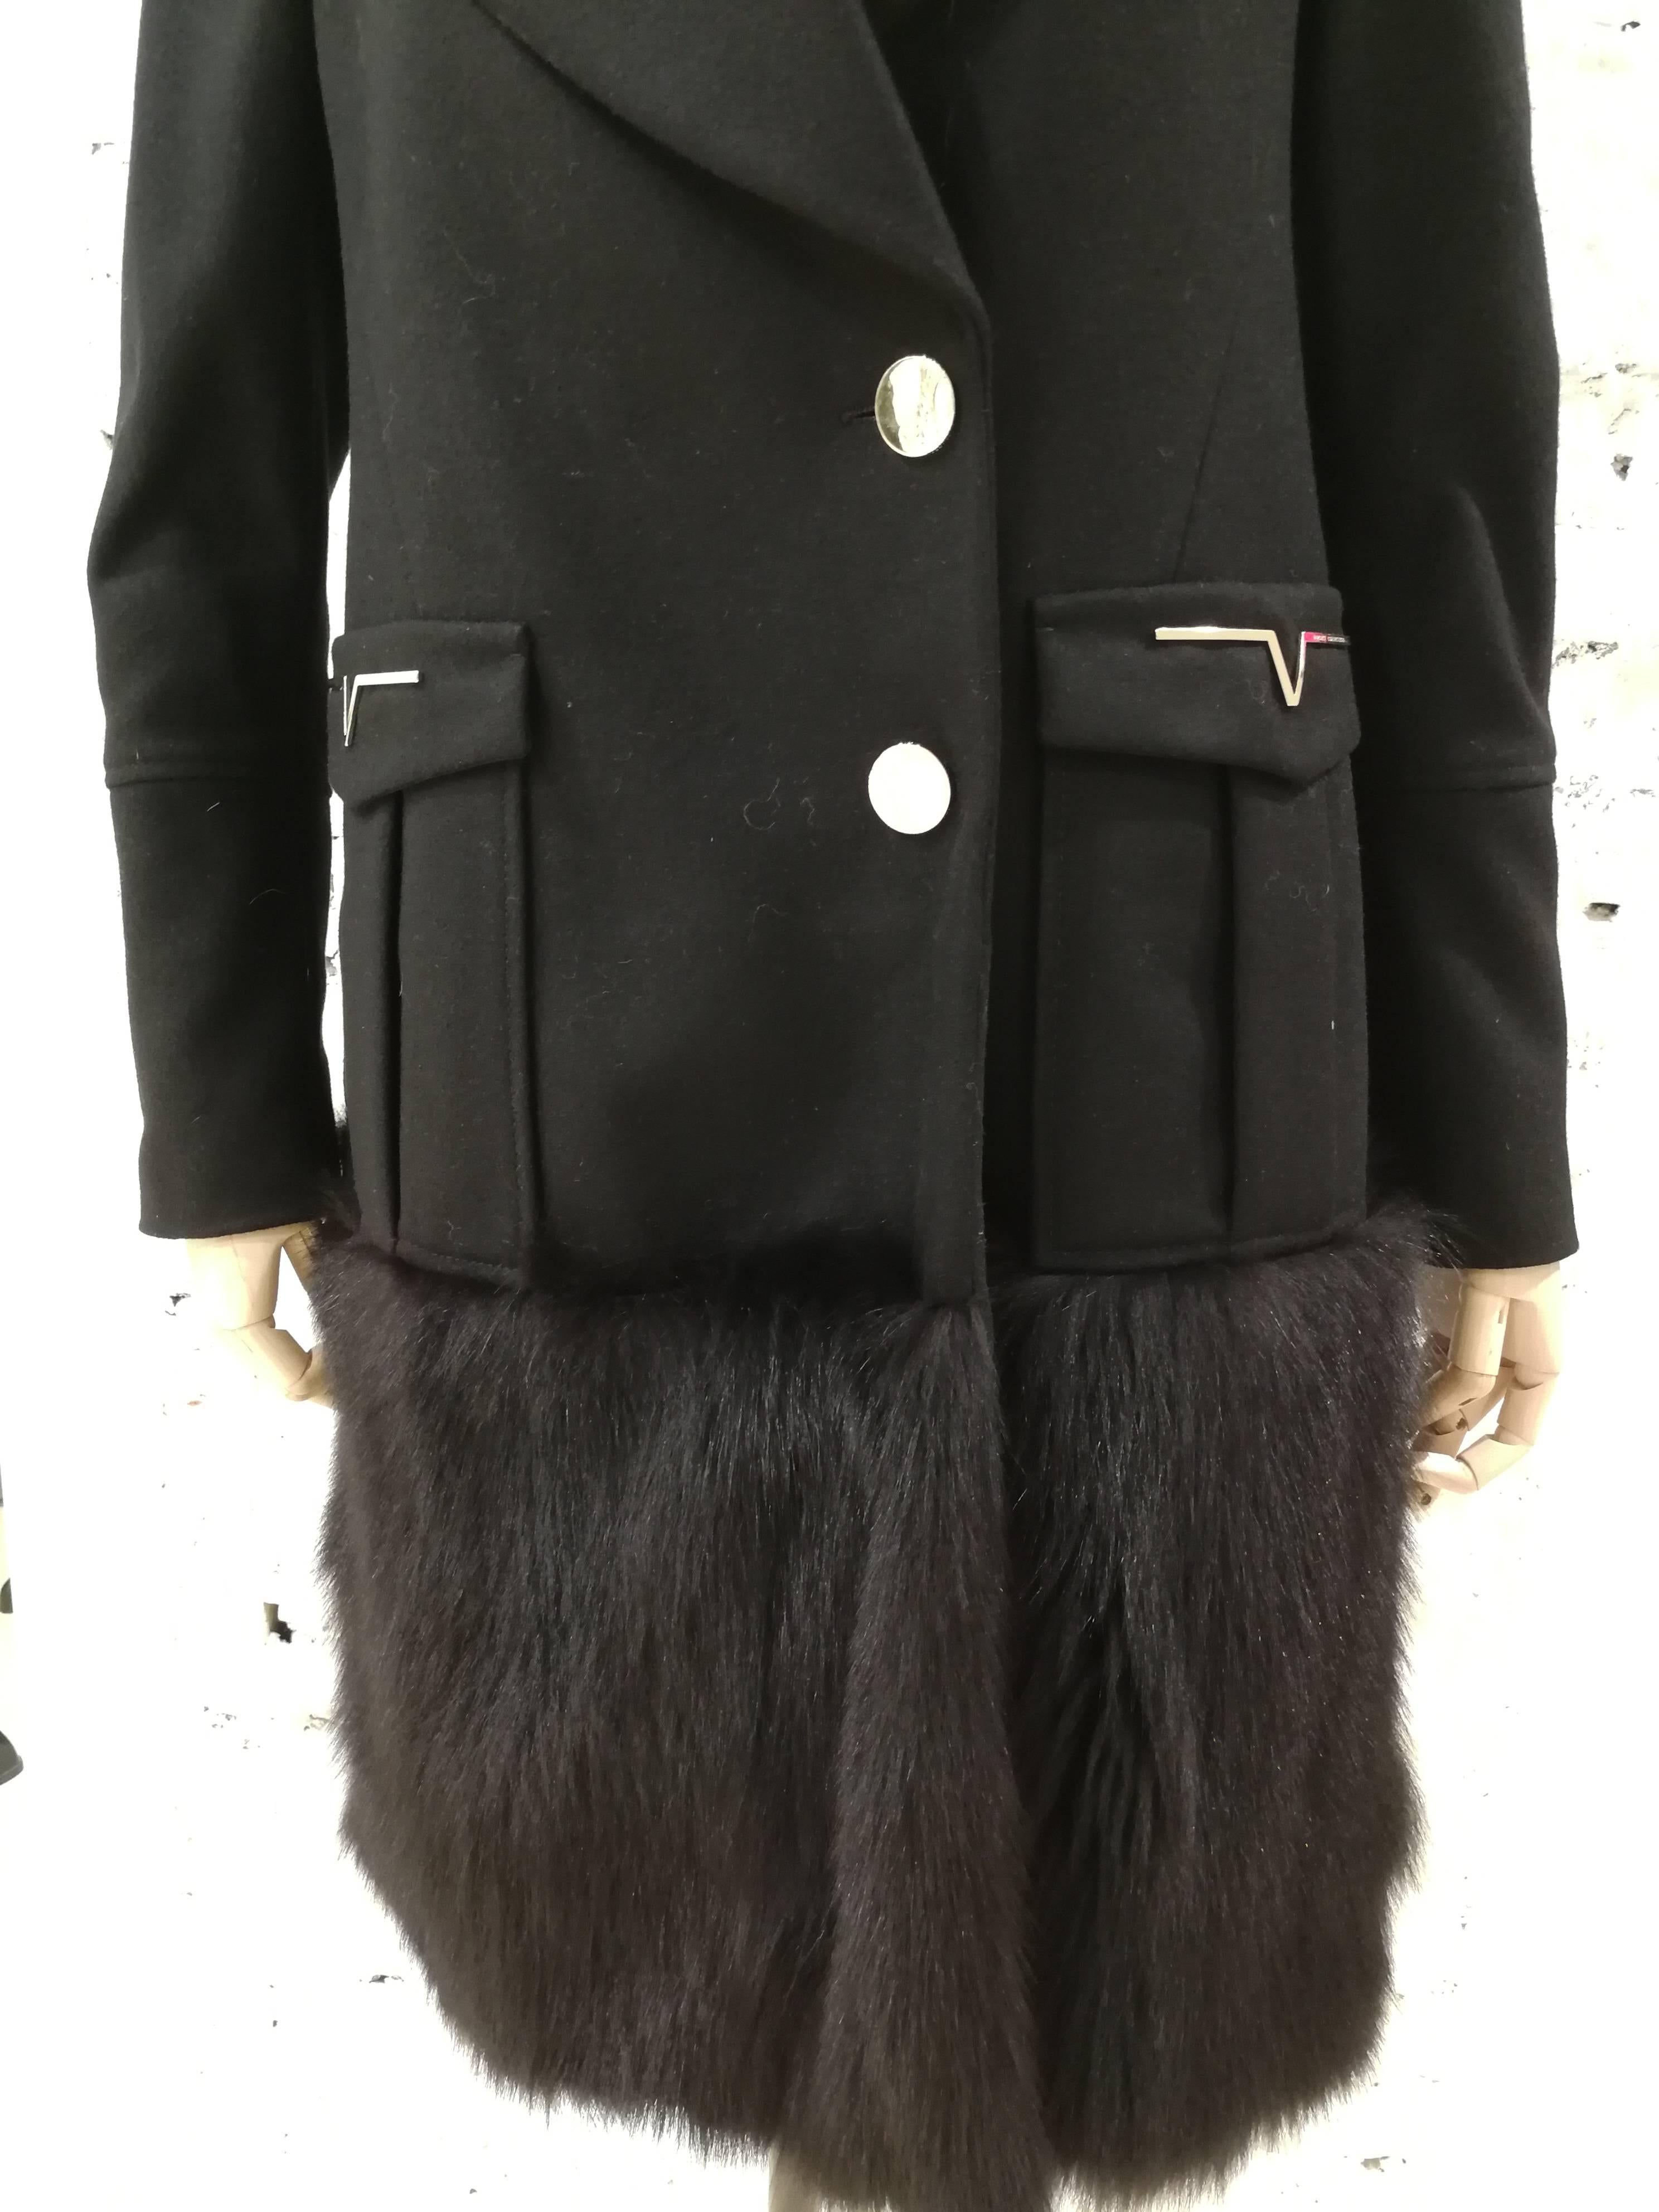 Versace Collection Black Wool and Fox Coat

Versace totally made in italy black wool coat

Real fox fur

Size: 40